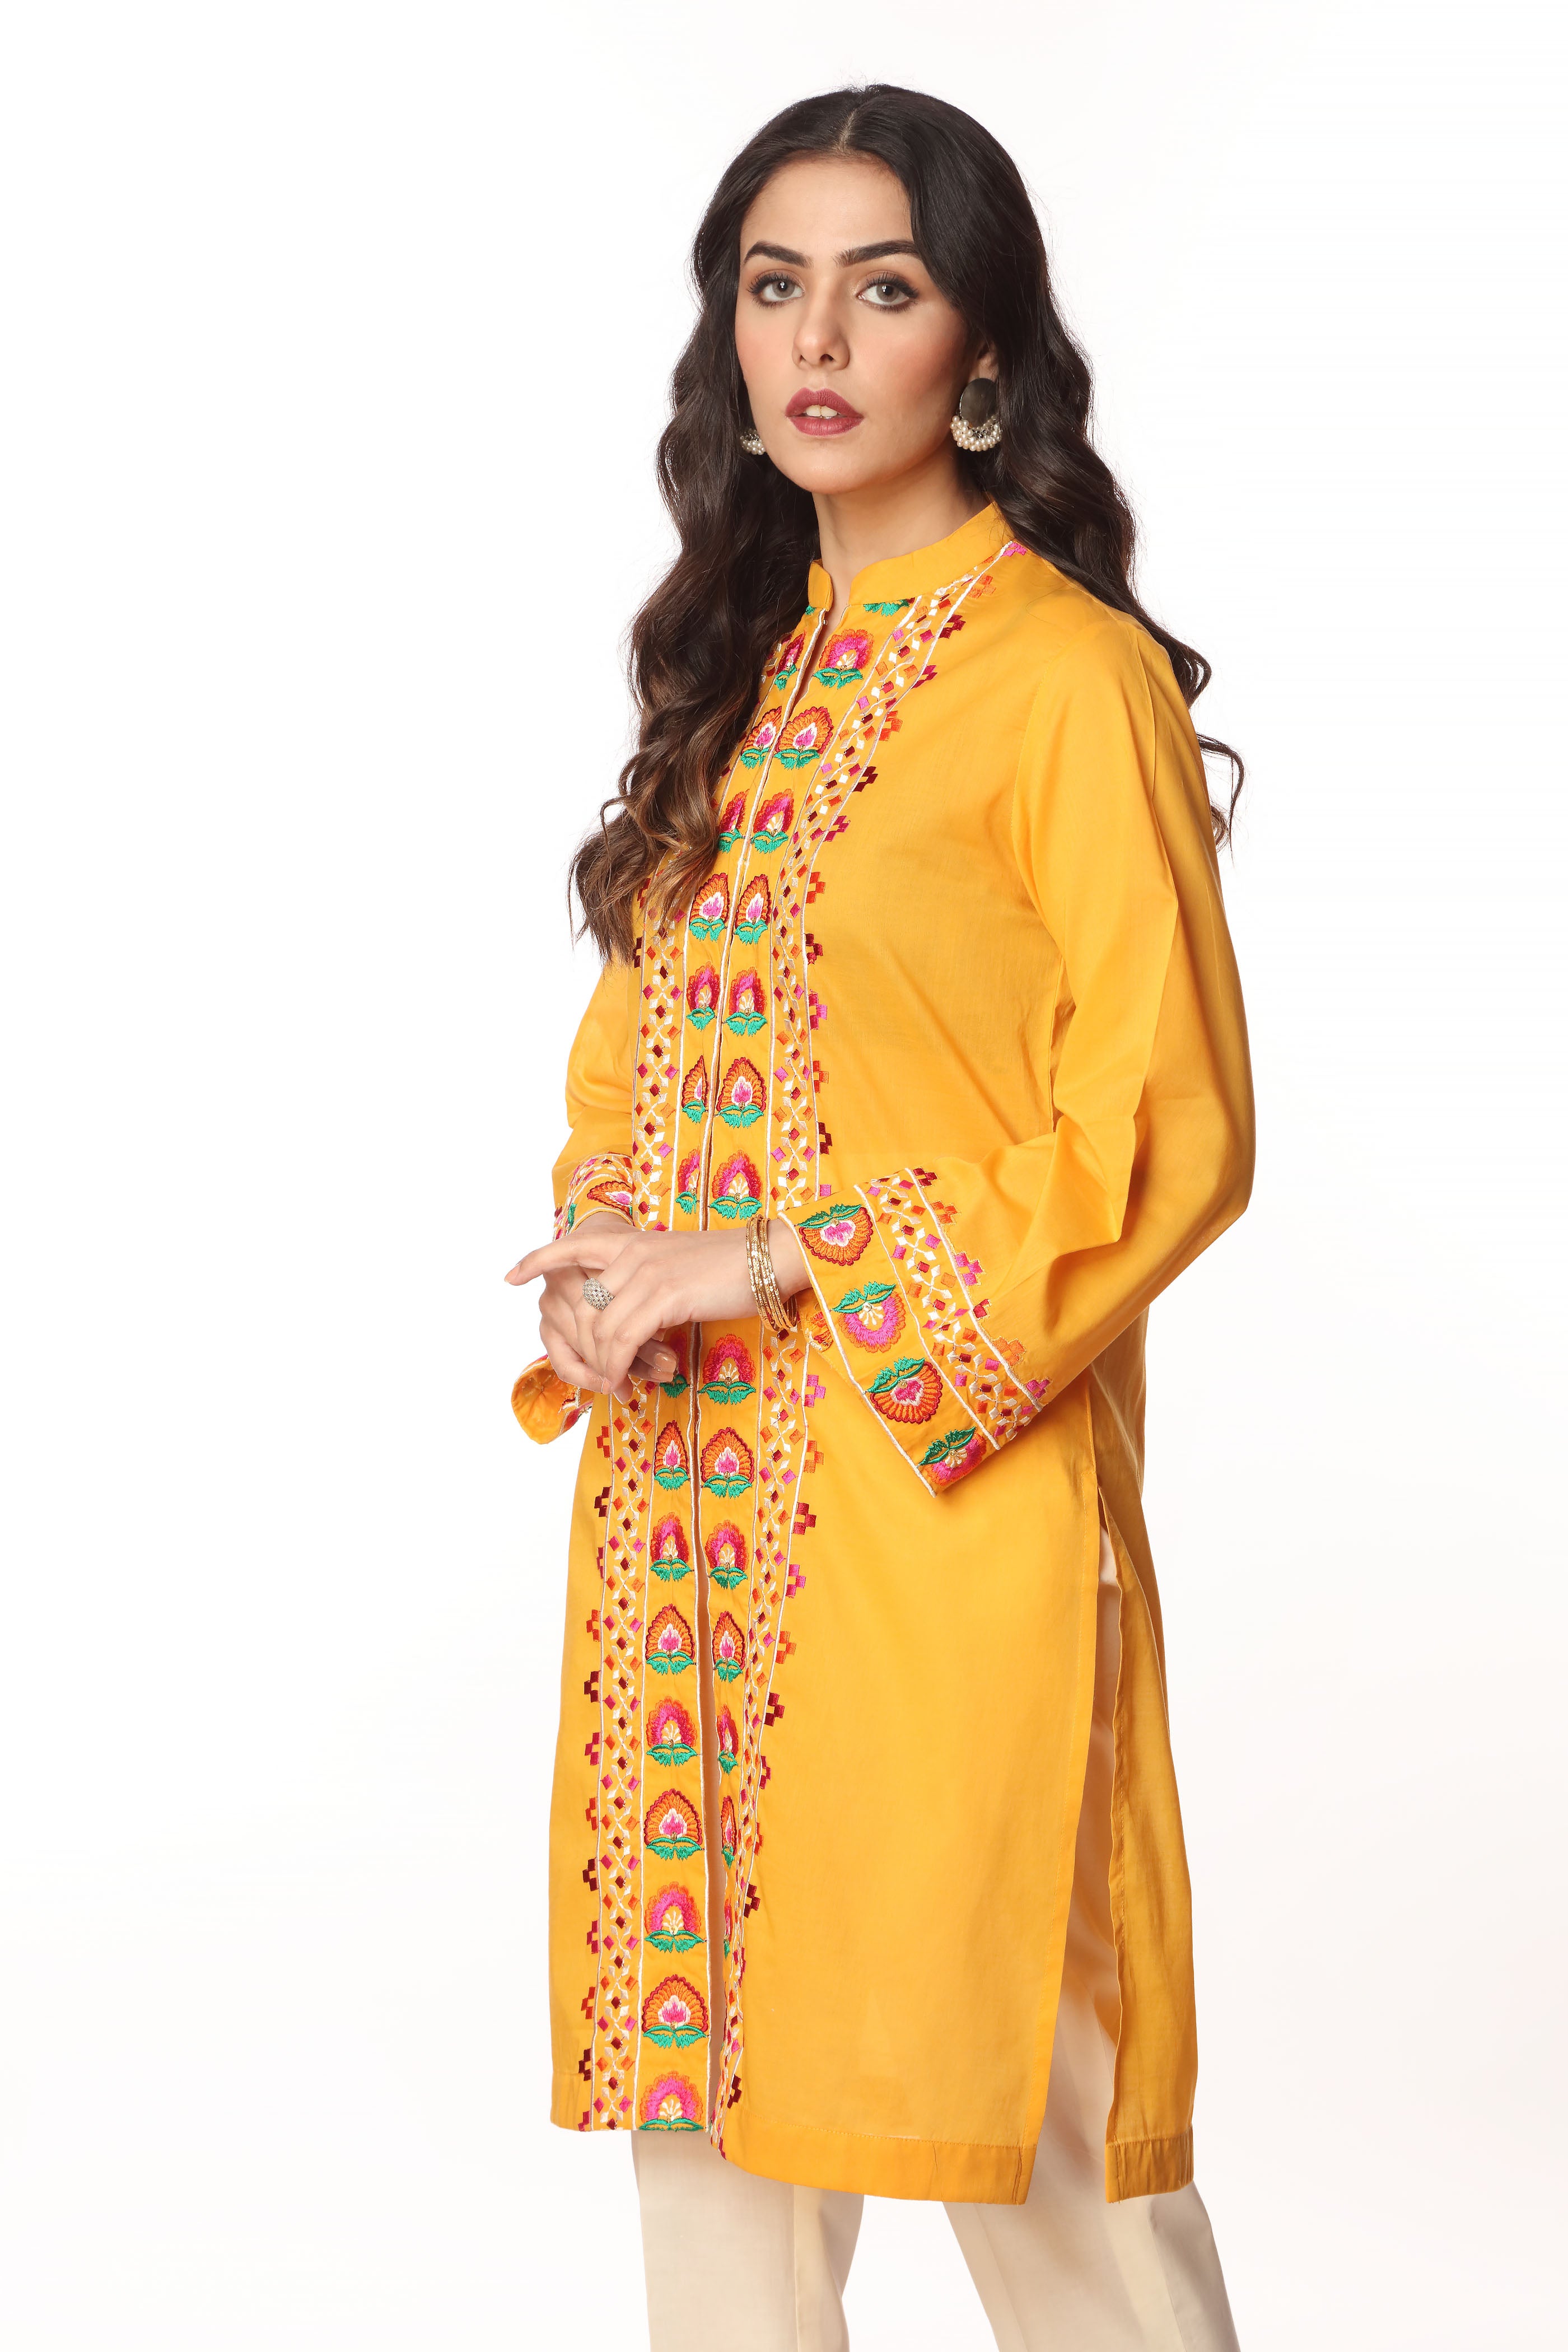 Mustard Flower 1 in Yellow coloured Printed Lawn fabric 2